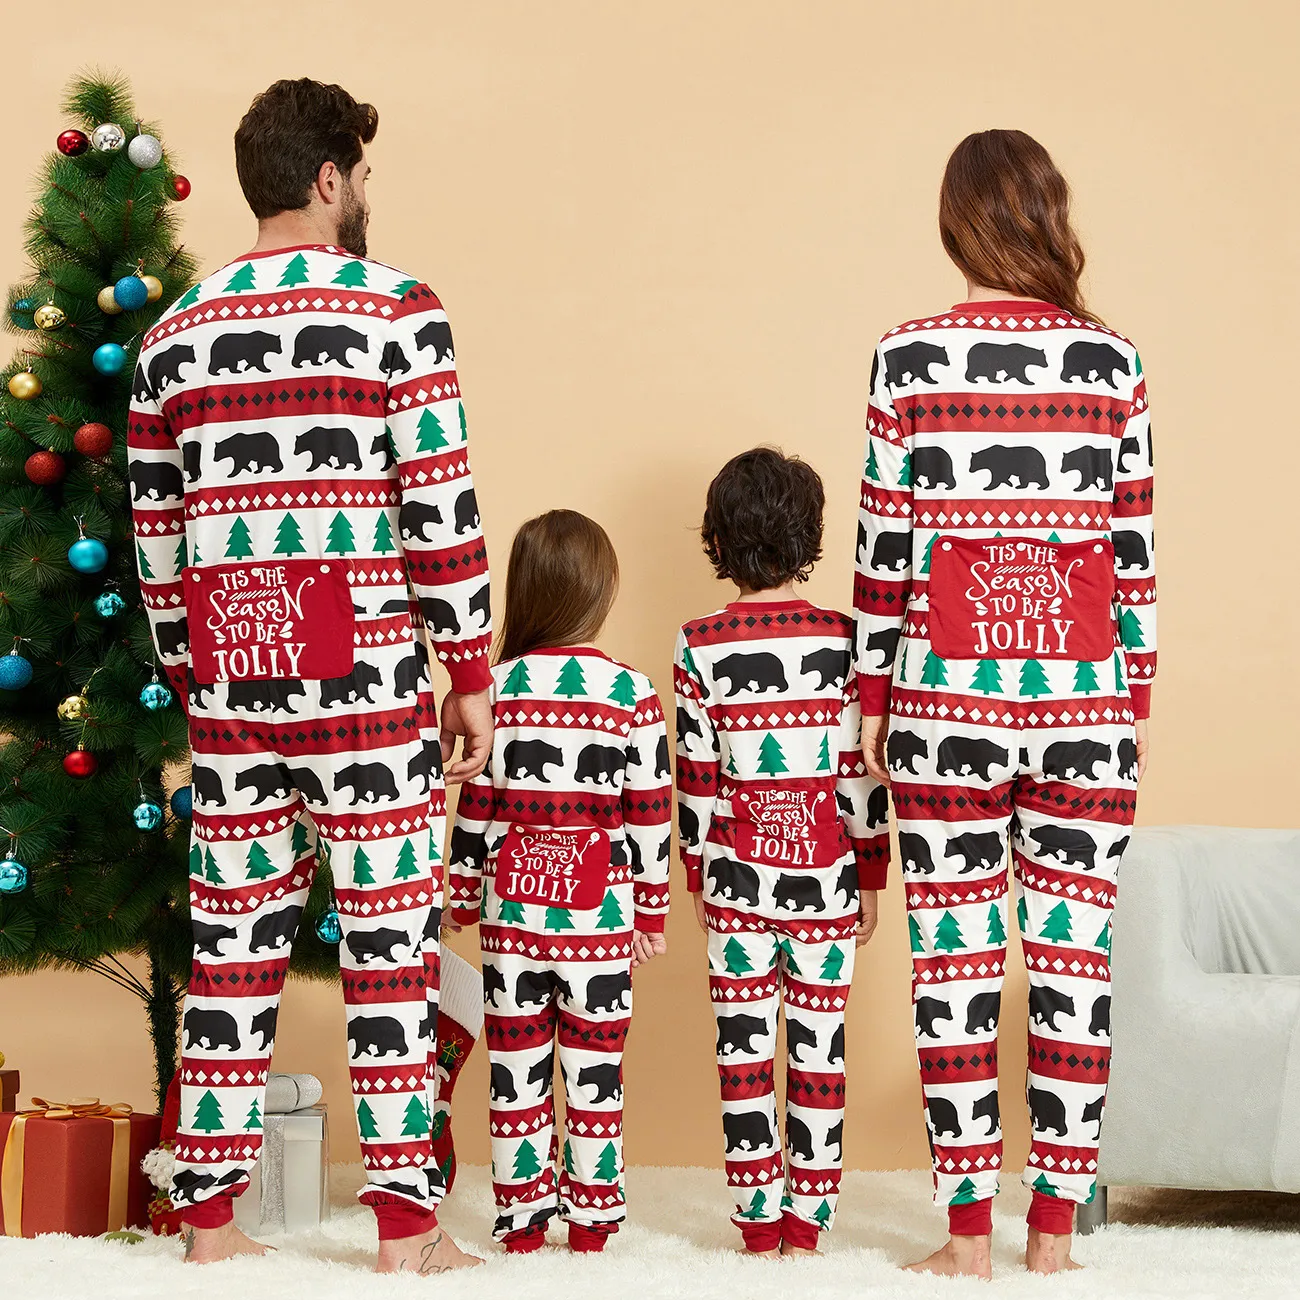 Buy Matching Family Christmas Pajamas Online for Sale - PatPat US